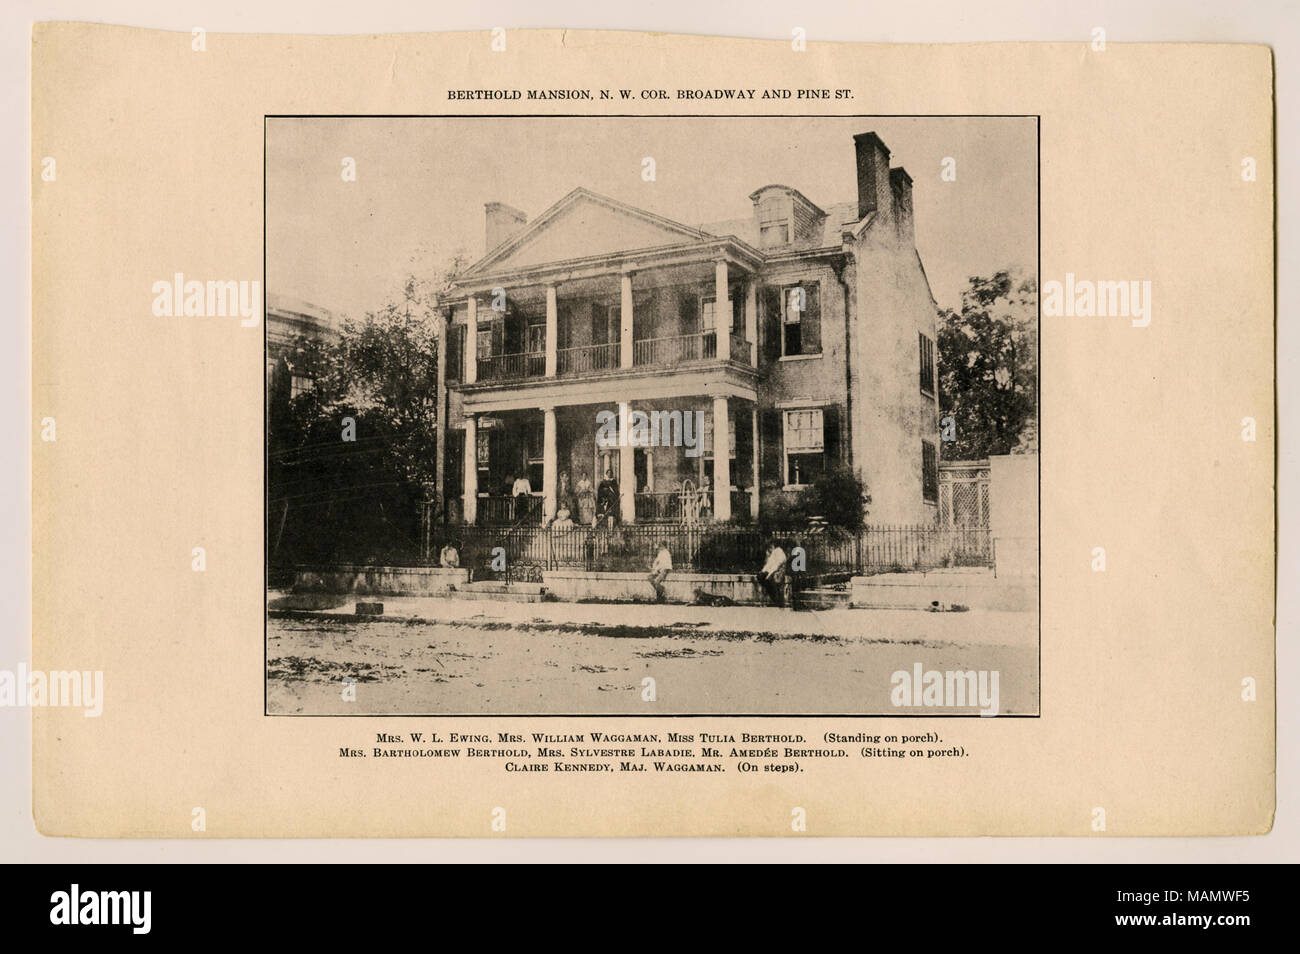 Horizontal, Black and white photograph of a two story brick residence. A wrought iron fence is in front of the structure and members of the household are pictured on the porch and steps of the residence. Caption above photo reads Berthold Mansion, N.W. Cor. Broadway and Pine St. Bottom Caption lists members in photo: Mrs. W.L. Ewing, Mrs. William Waggaman, Miss Tulia Bertholdd (Standing on porch) Mrs. Batholomew Berthold, Mrs. Sylvestre Labadie, Mr. Amedee Berthold (Sitting on porch) Claire Kennedy, Maj. Waggaman. (On steps) Title: Berthold Residence. Northwest corner Broadway and Pine Street. Stock Photo